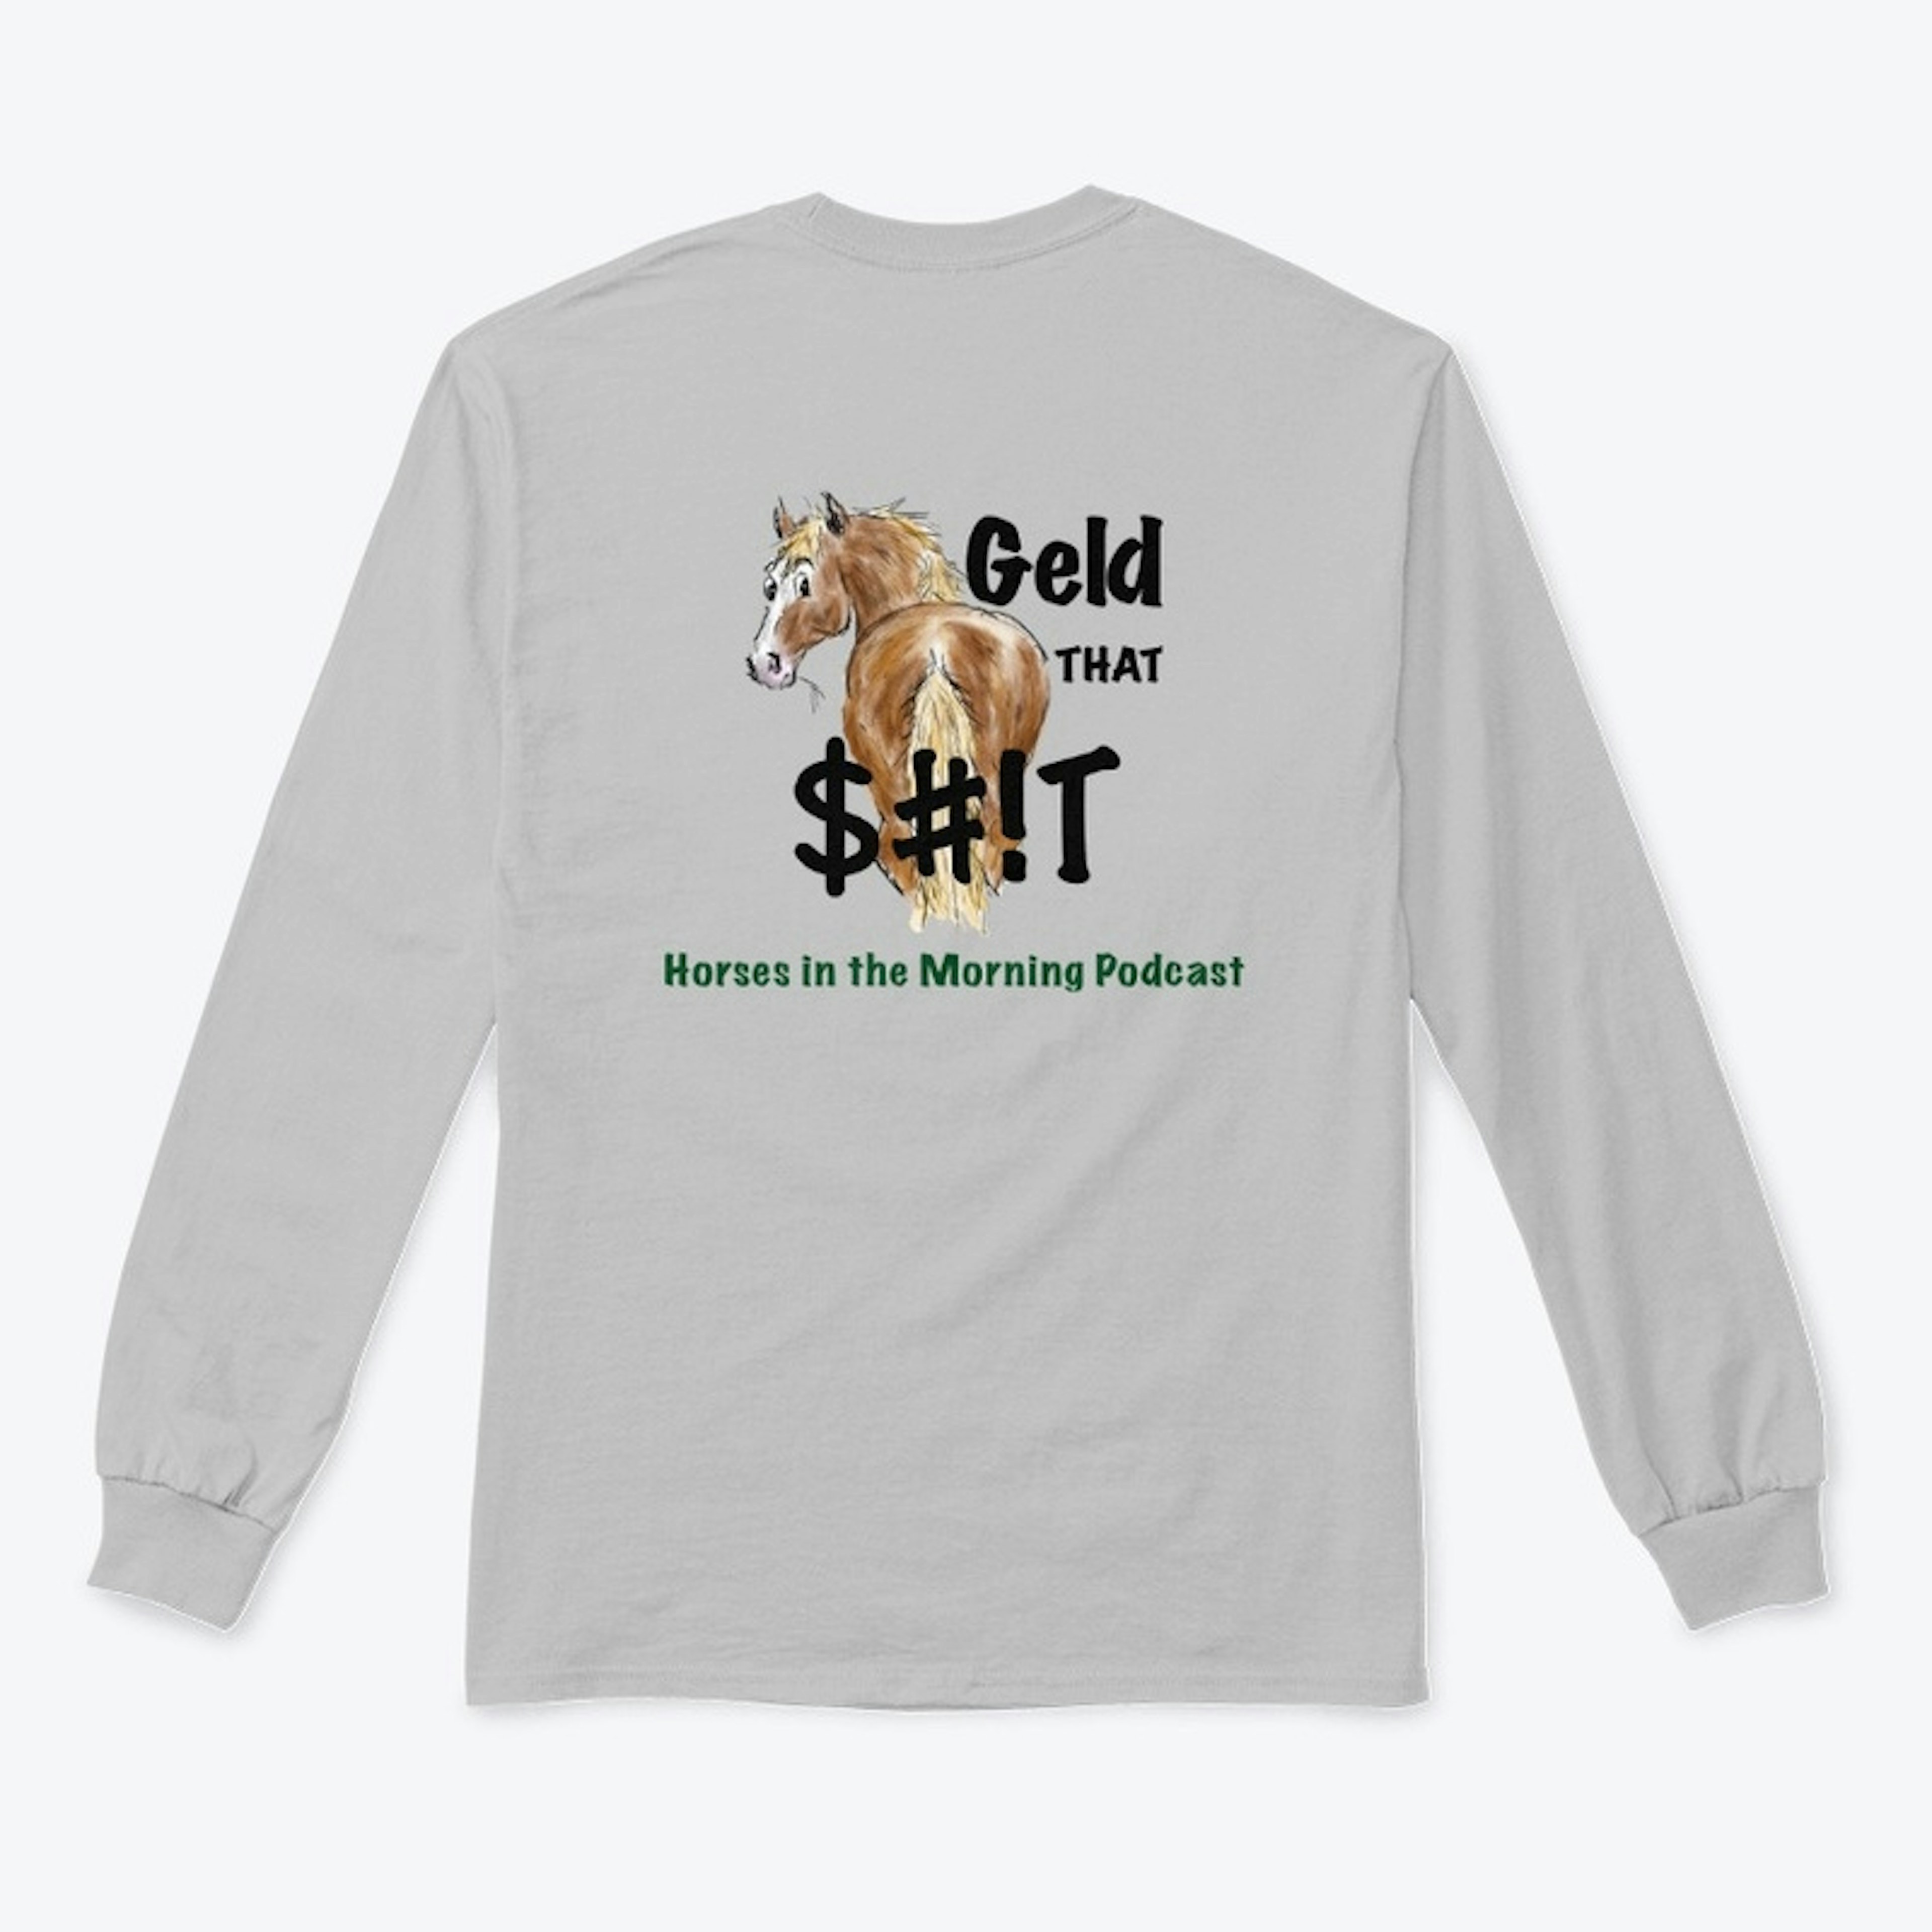 Geld That $#!t - Classic Long Sleeve Tee